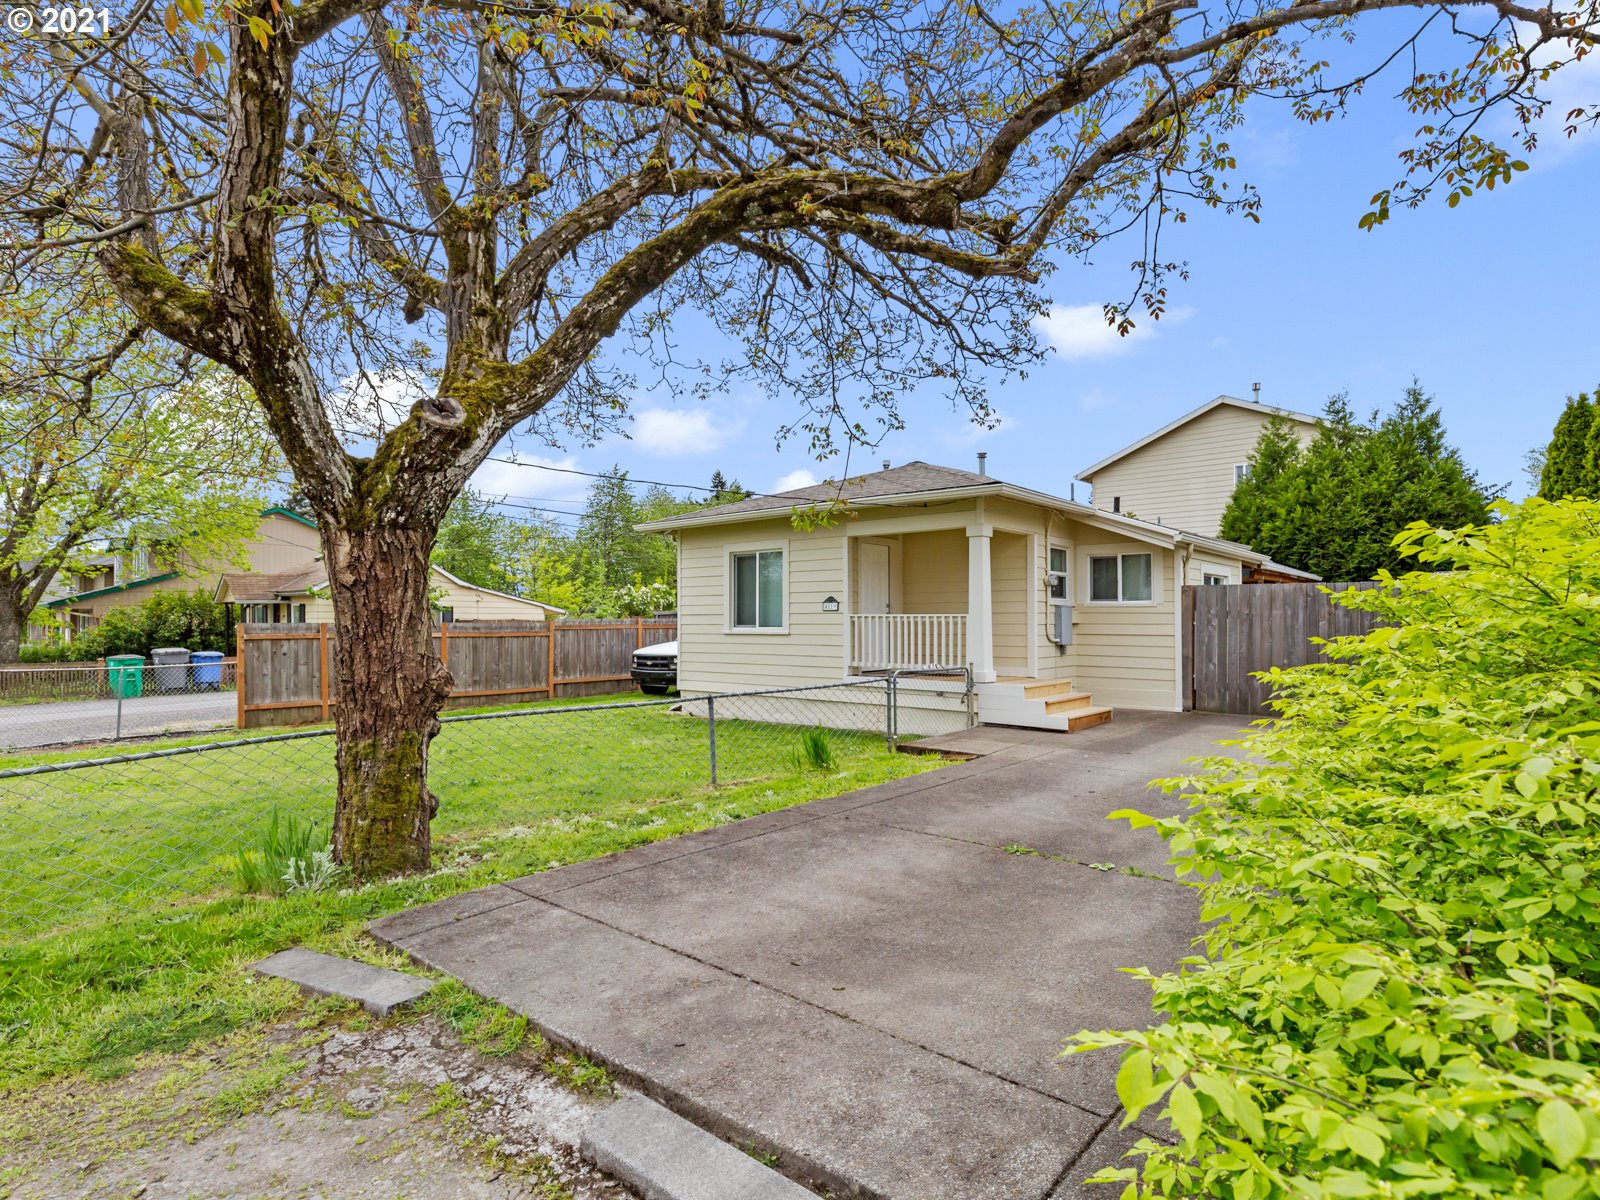 4819 SE 104TH AVE (1 of 13)